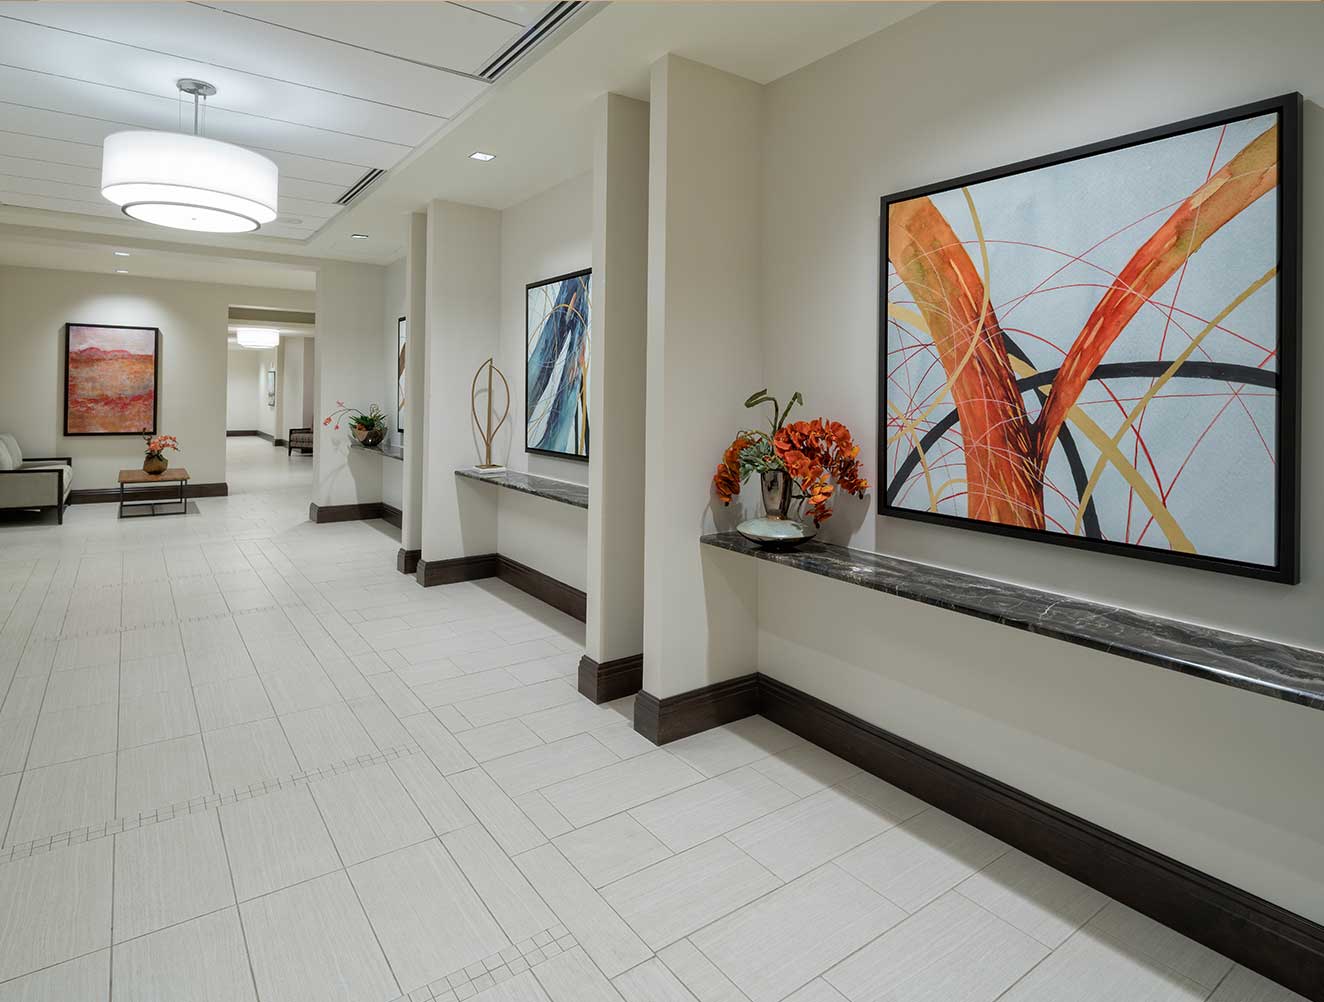 Modern commercial walk way with abstract art decor and custom granite wall ledges